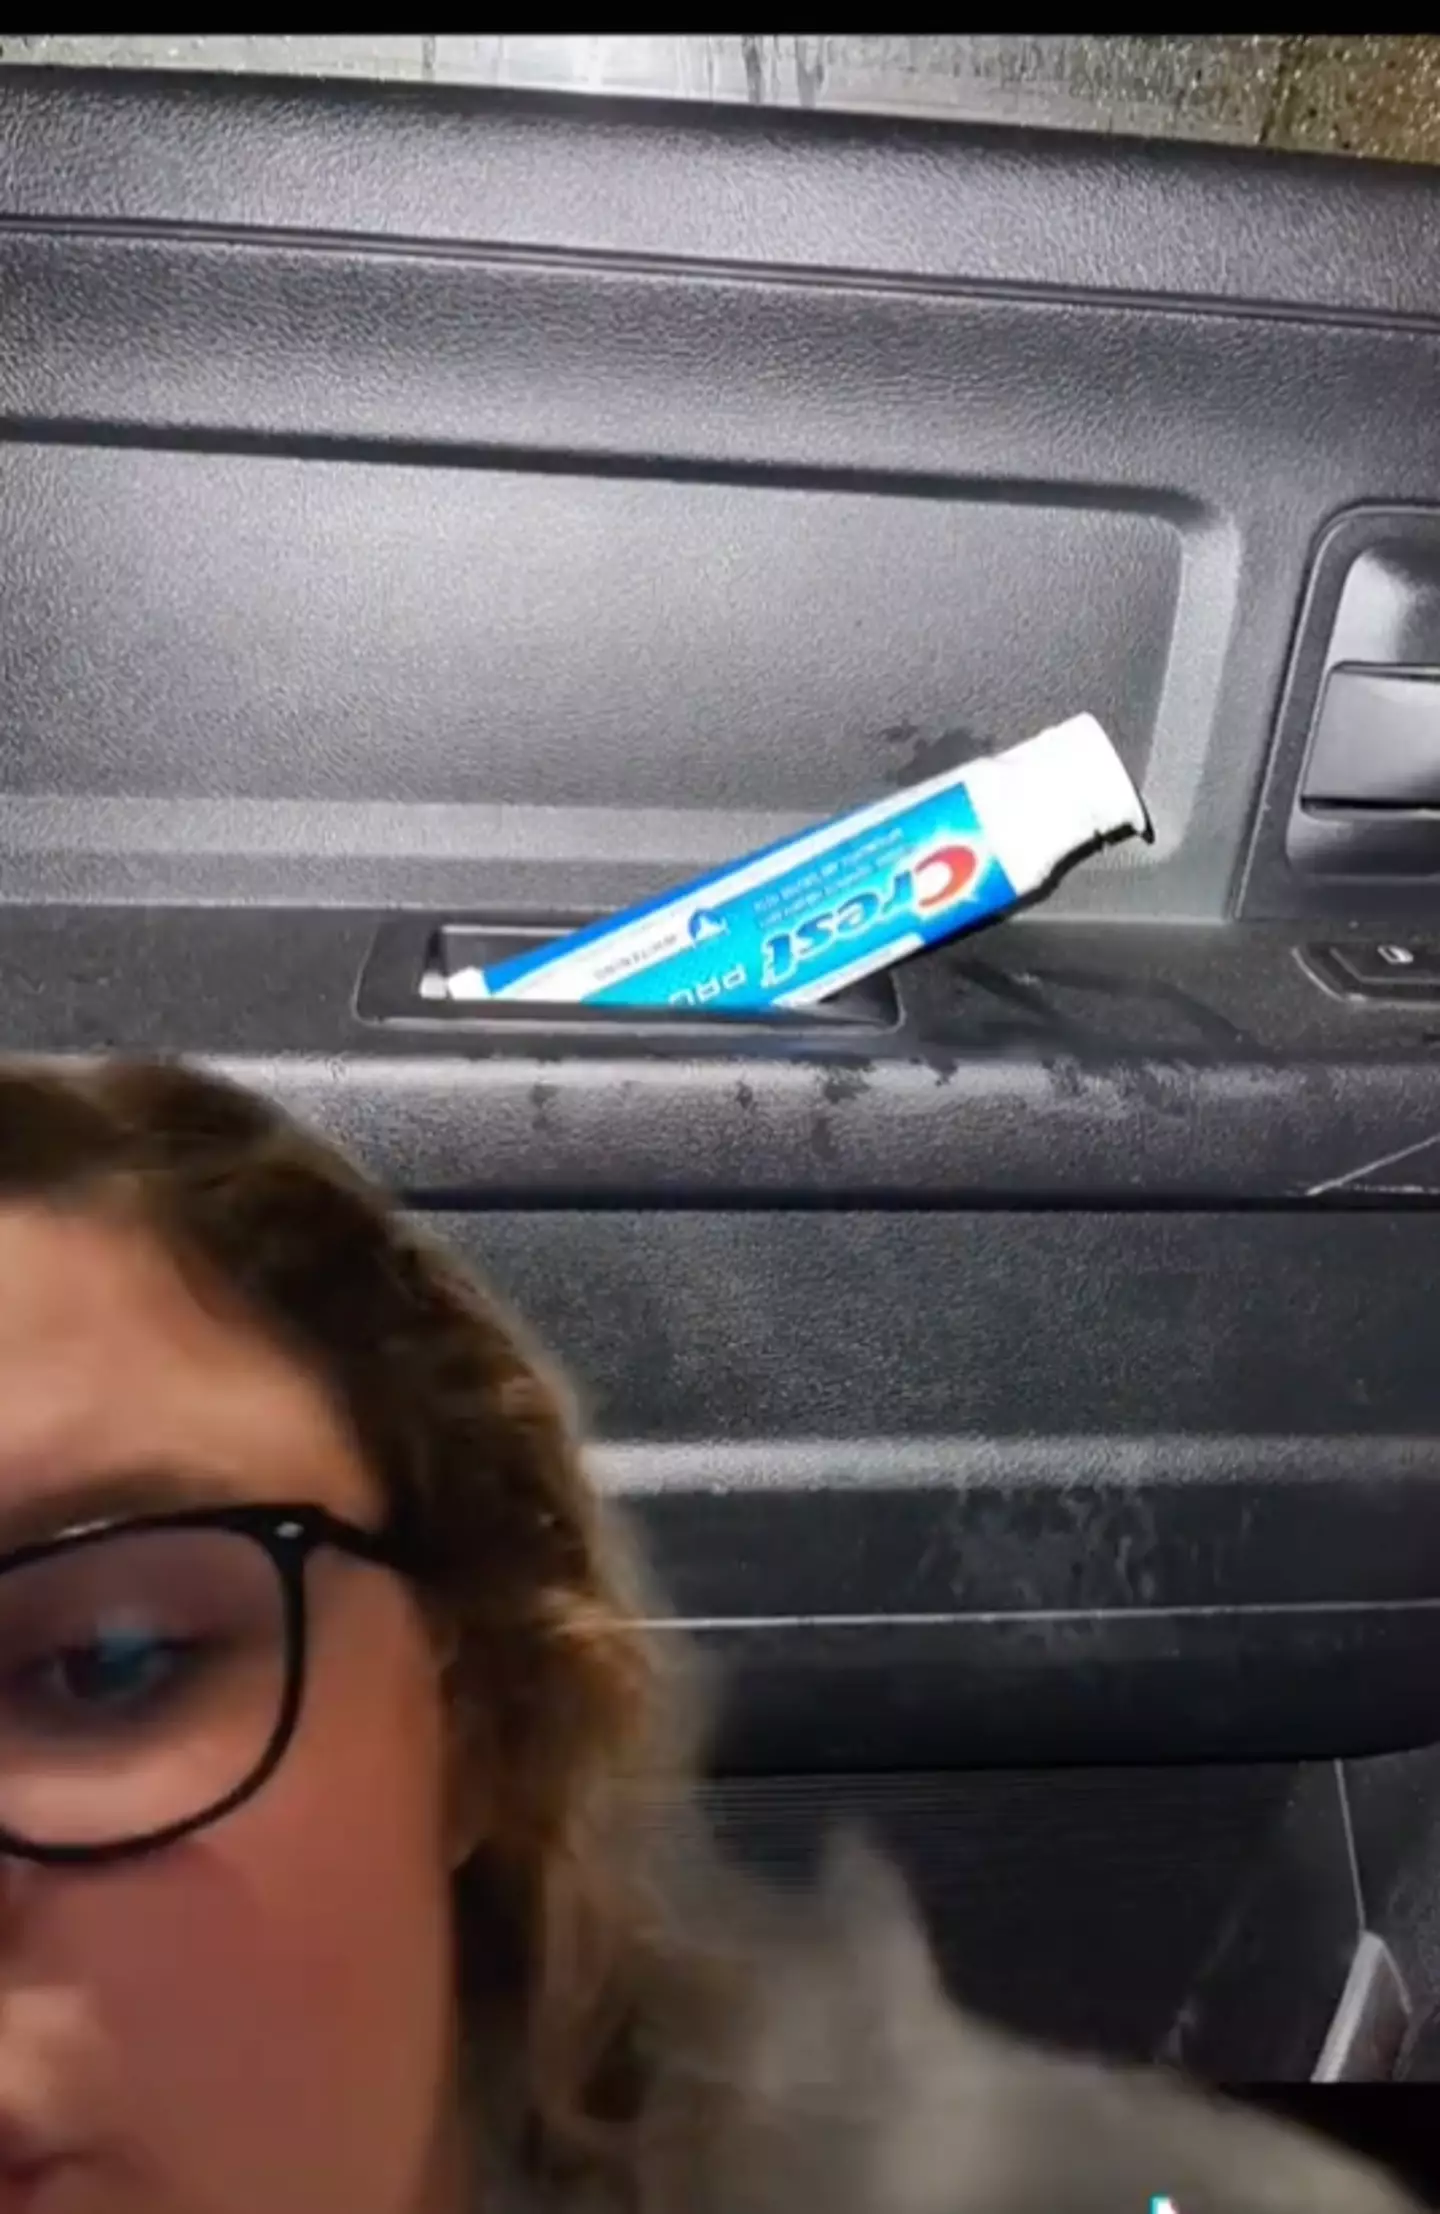 The woman claims she found toothpaste in the truck (